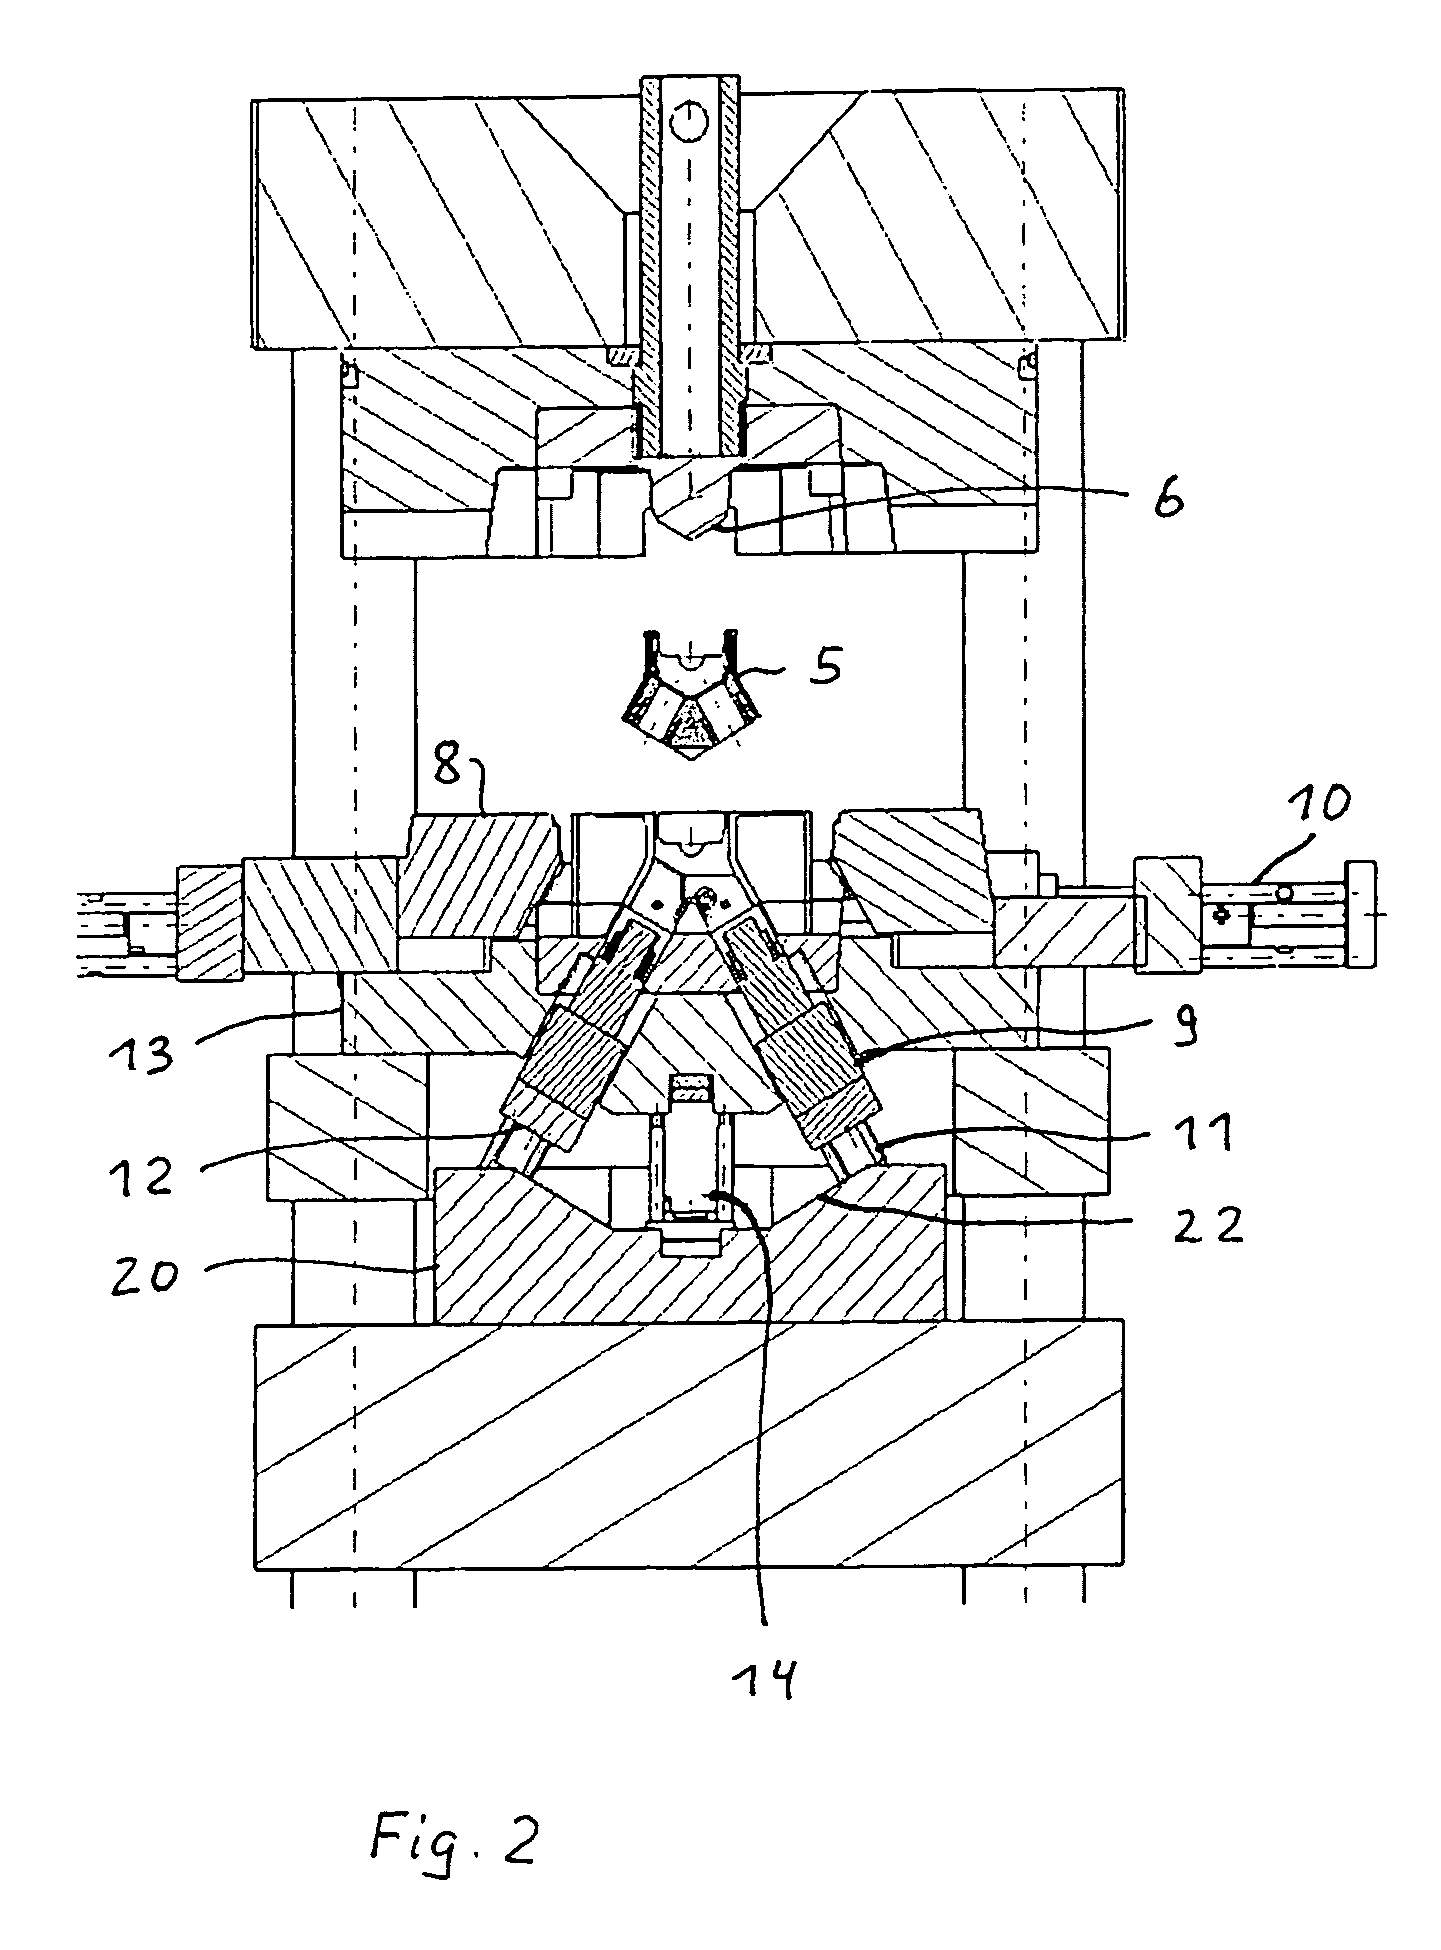 Injection-molding device for manufacturing V-engine blocks